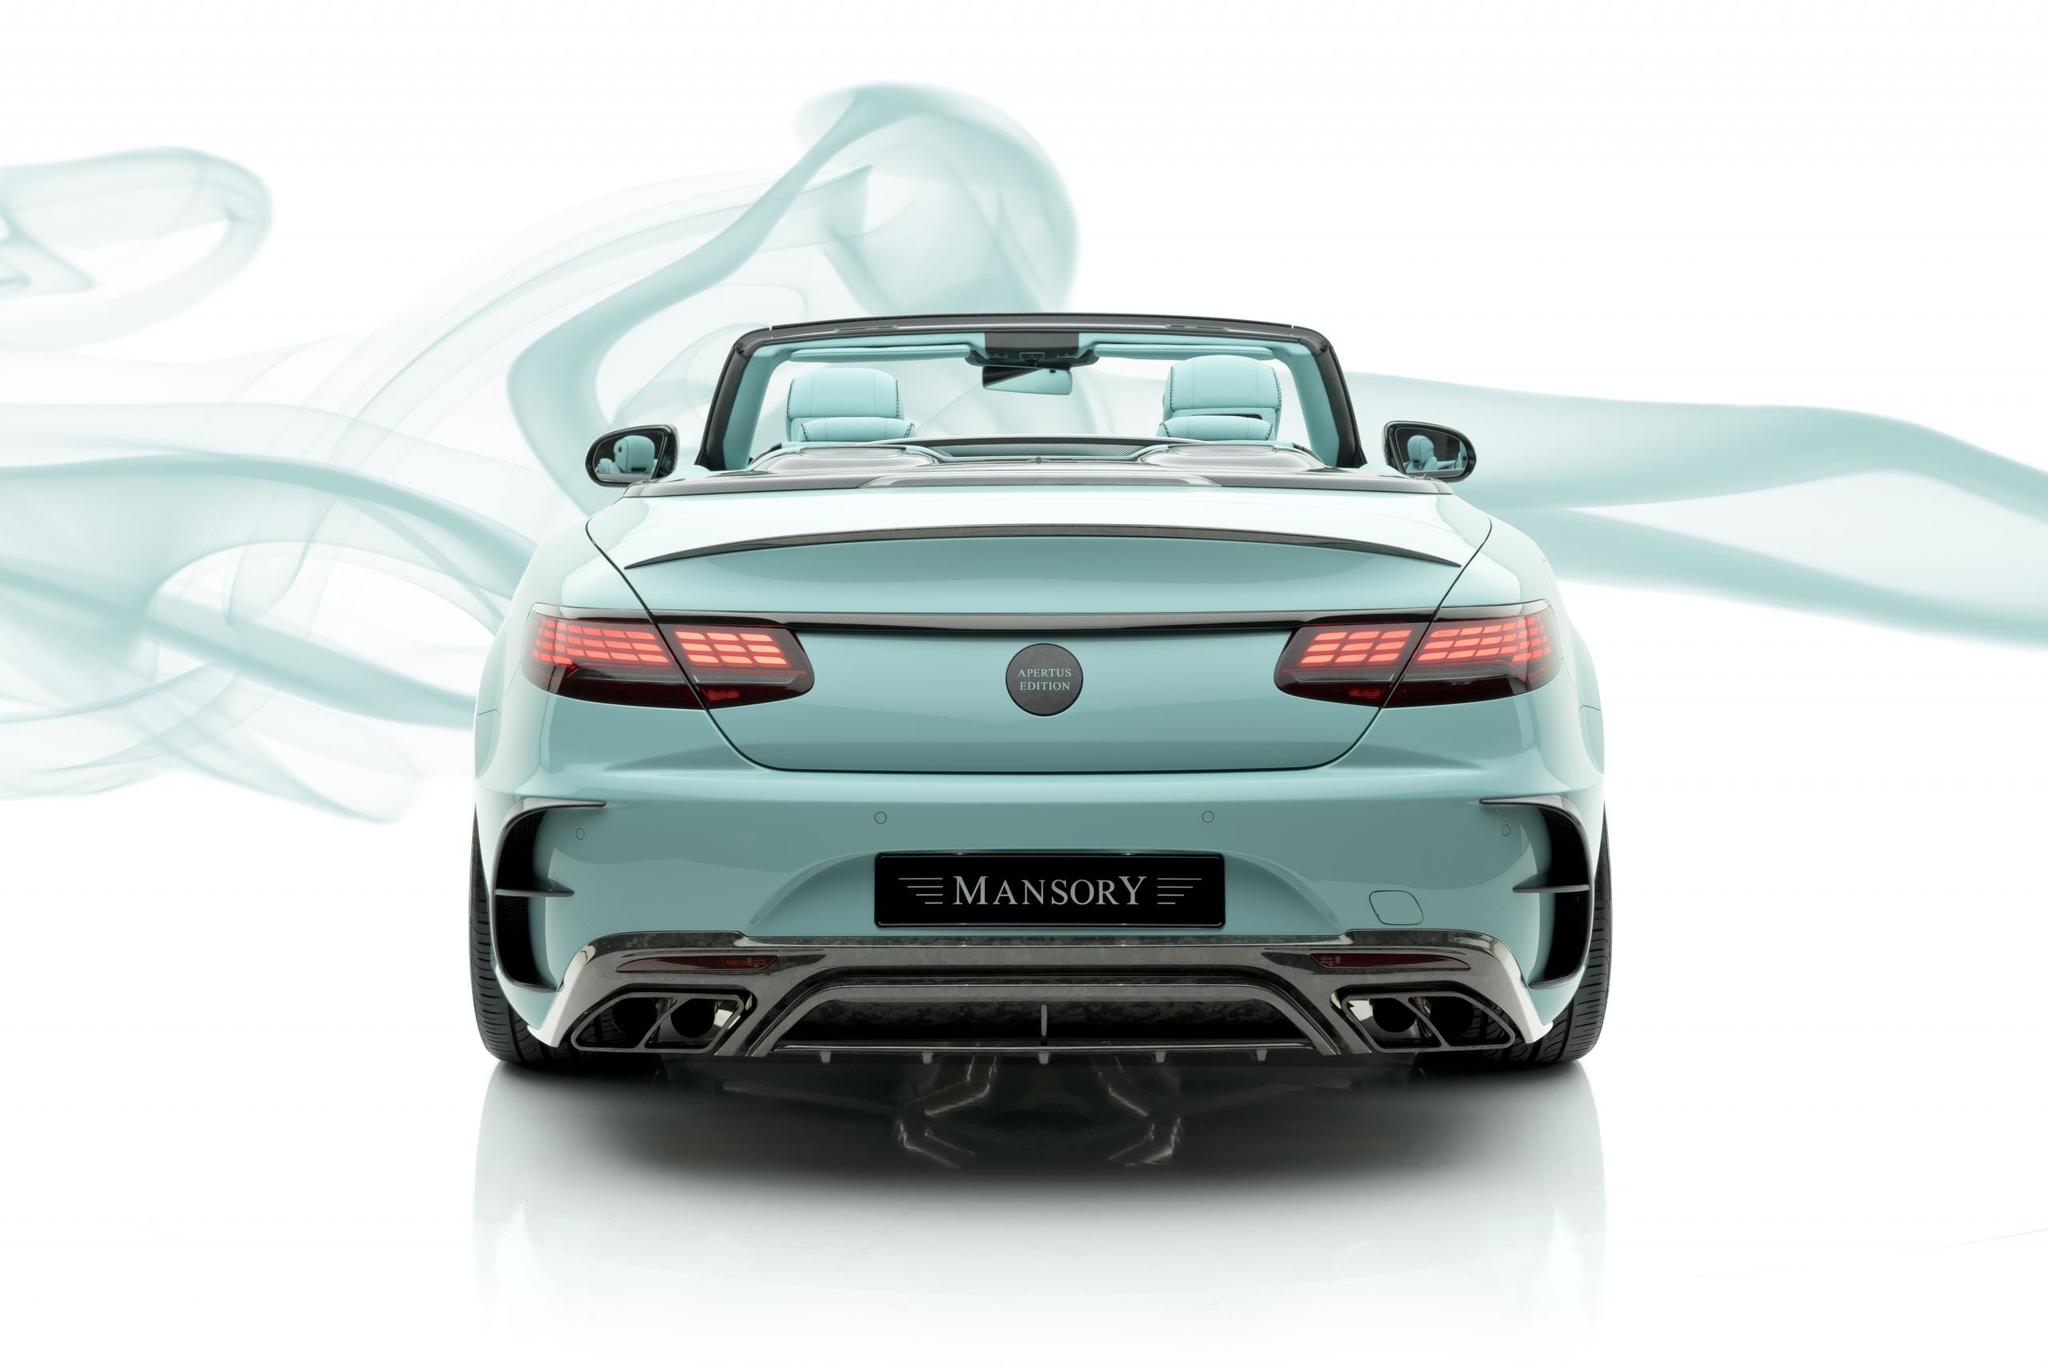 Mansory body kit for Mercedes S-Class Coupe latest model